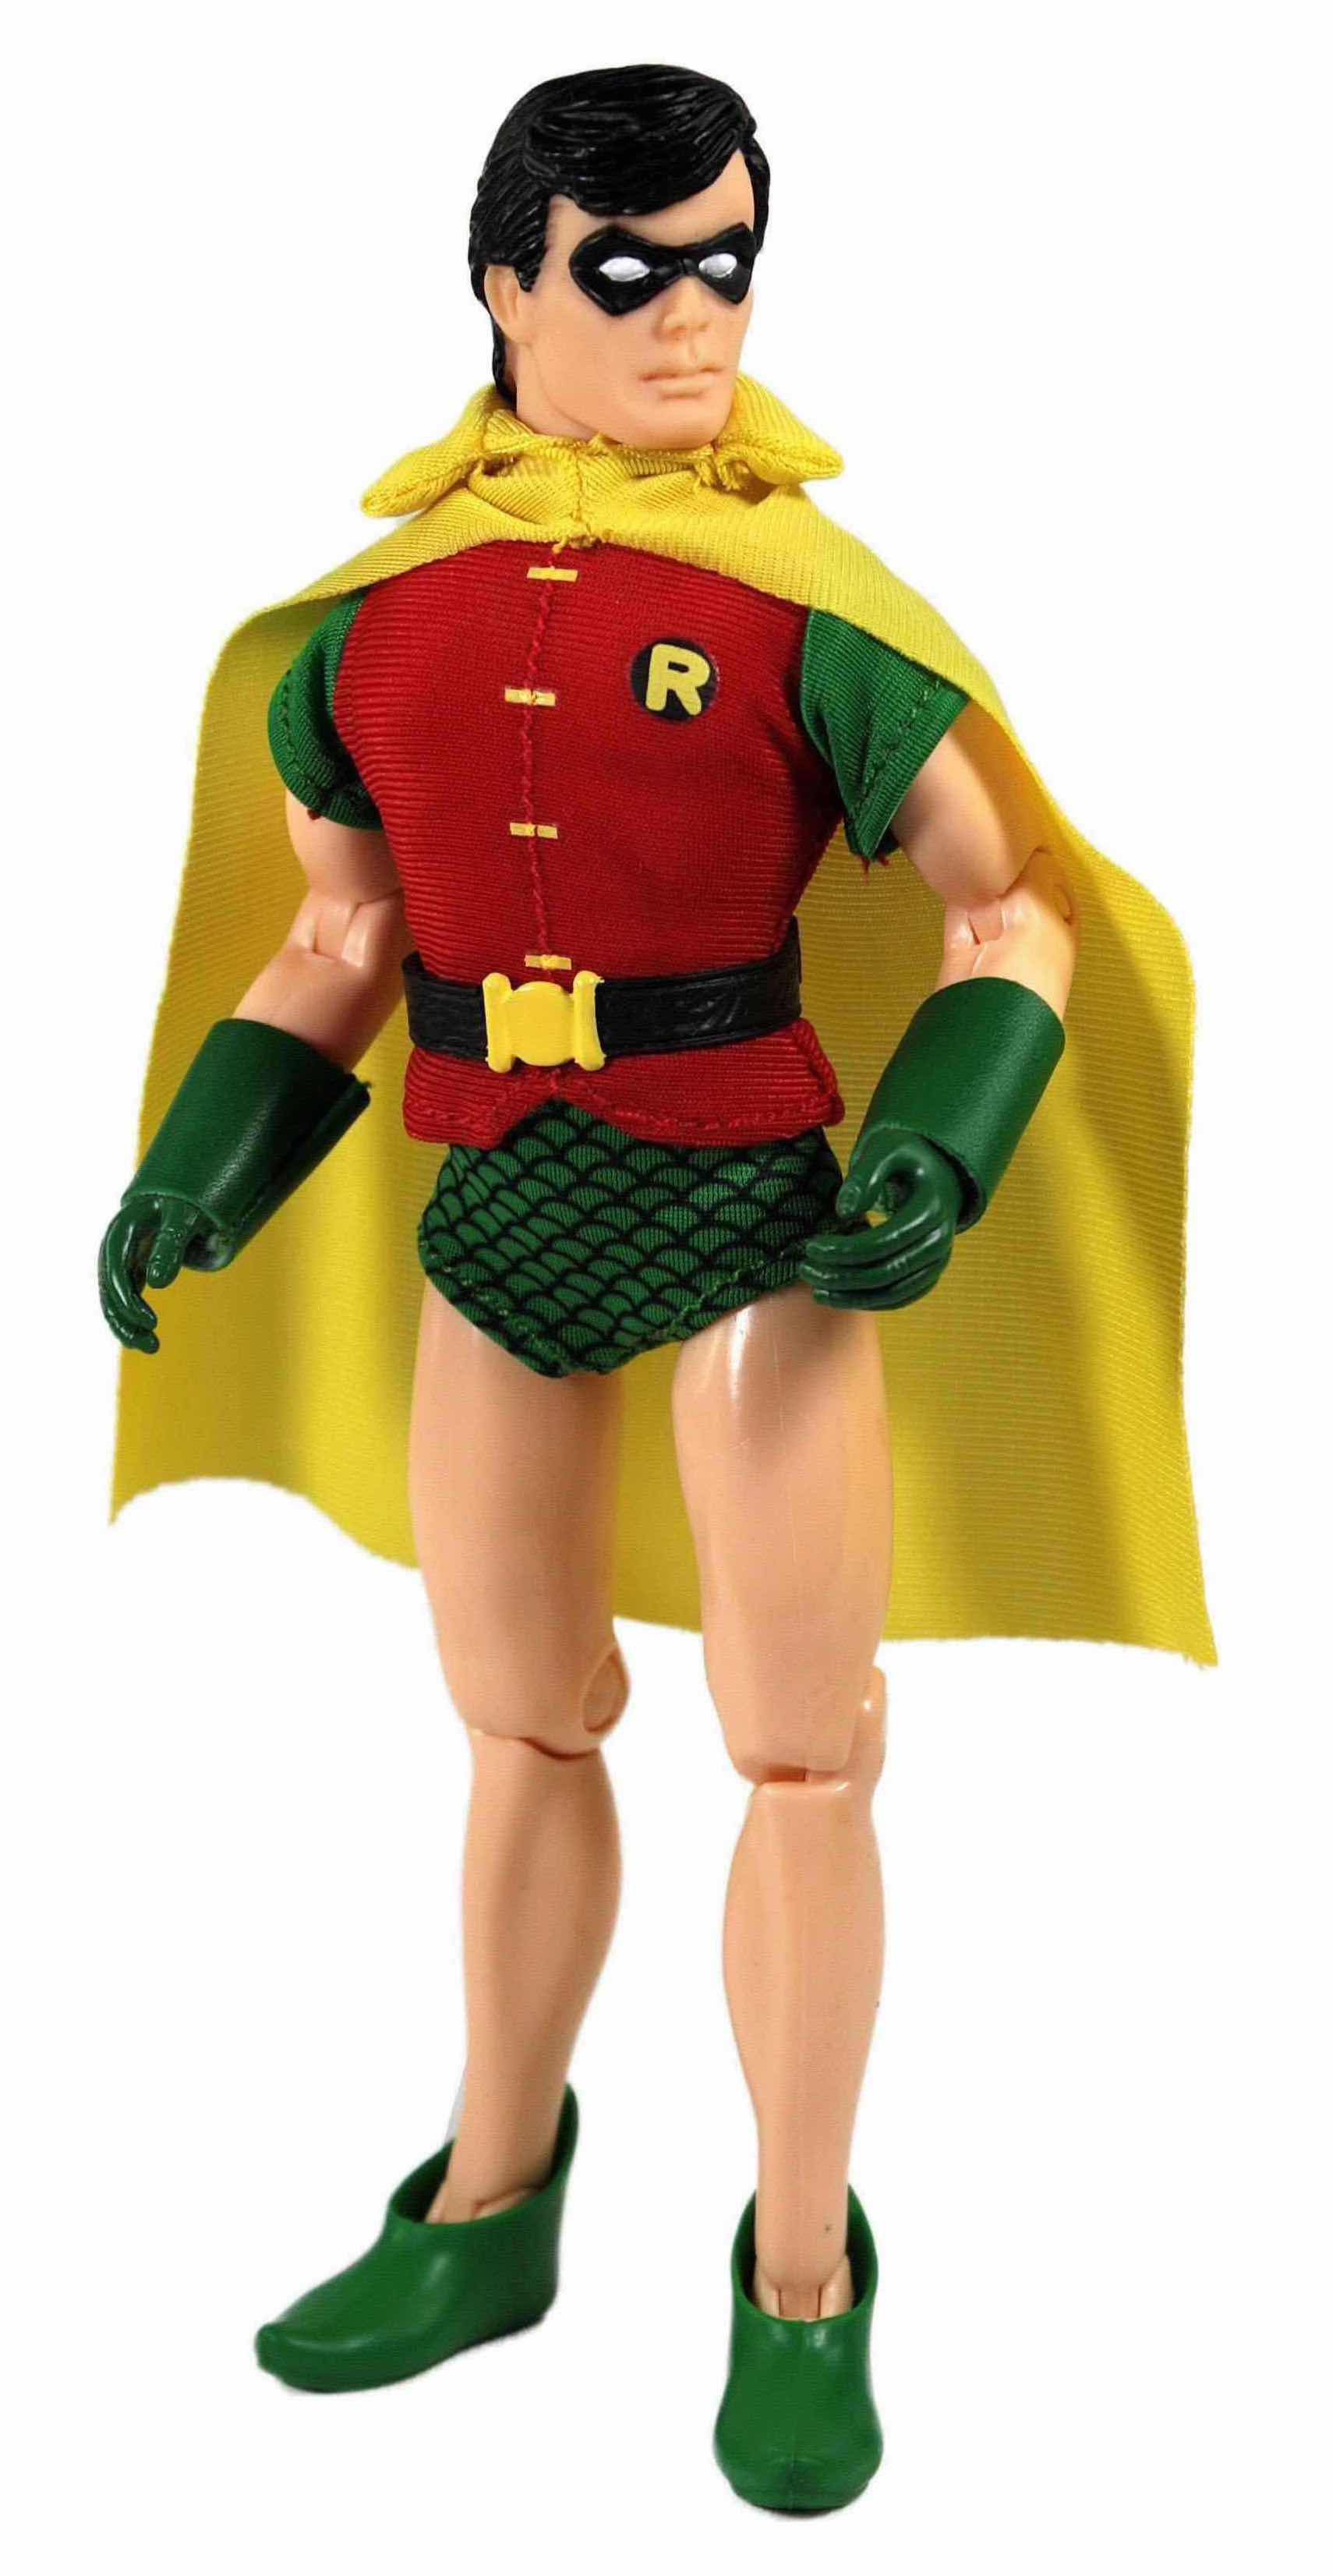 Photo 1 of BRAND NEW MEGO 8” ACTION FIGURE, DC COMICS “ROBIN”